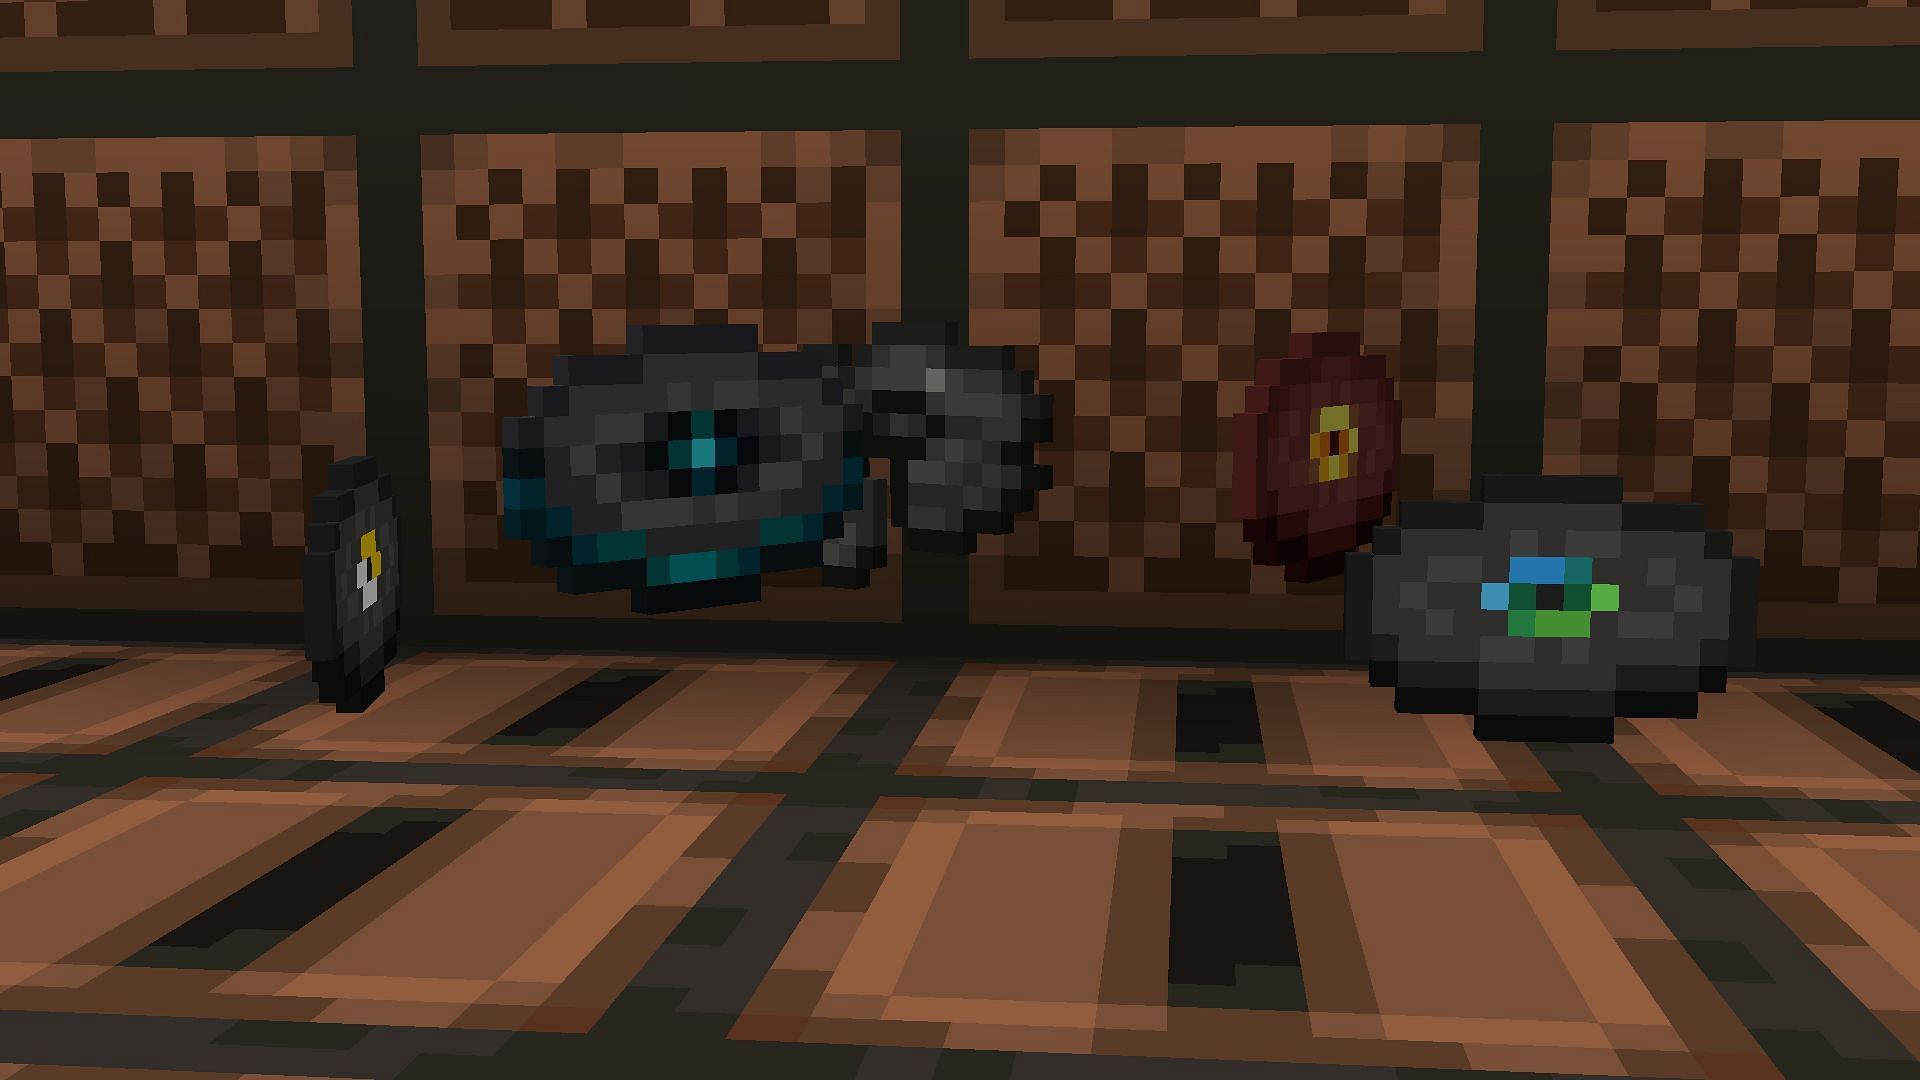 There are many great music discs in Minecraft (Image via Mojang)